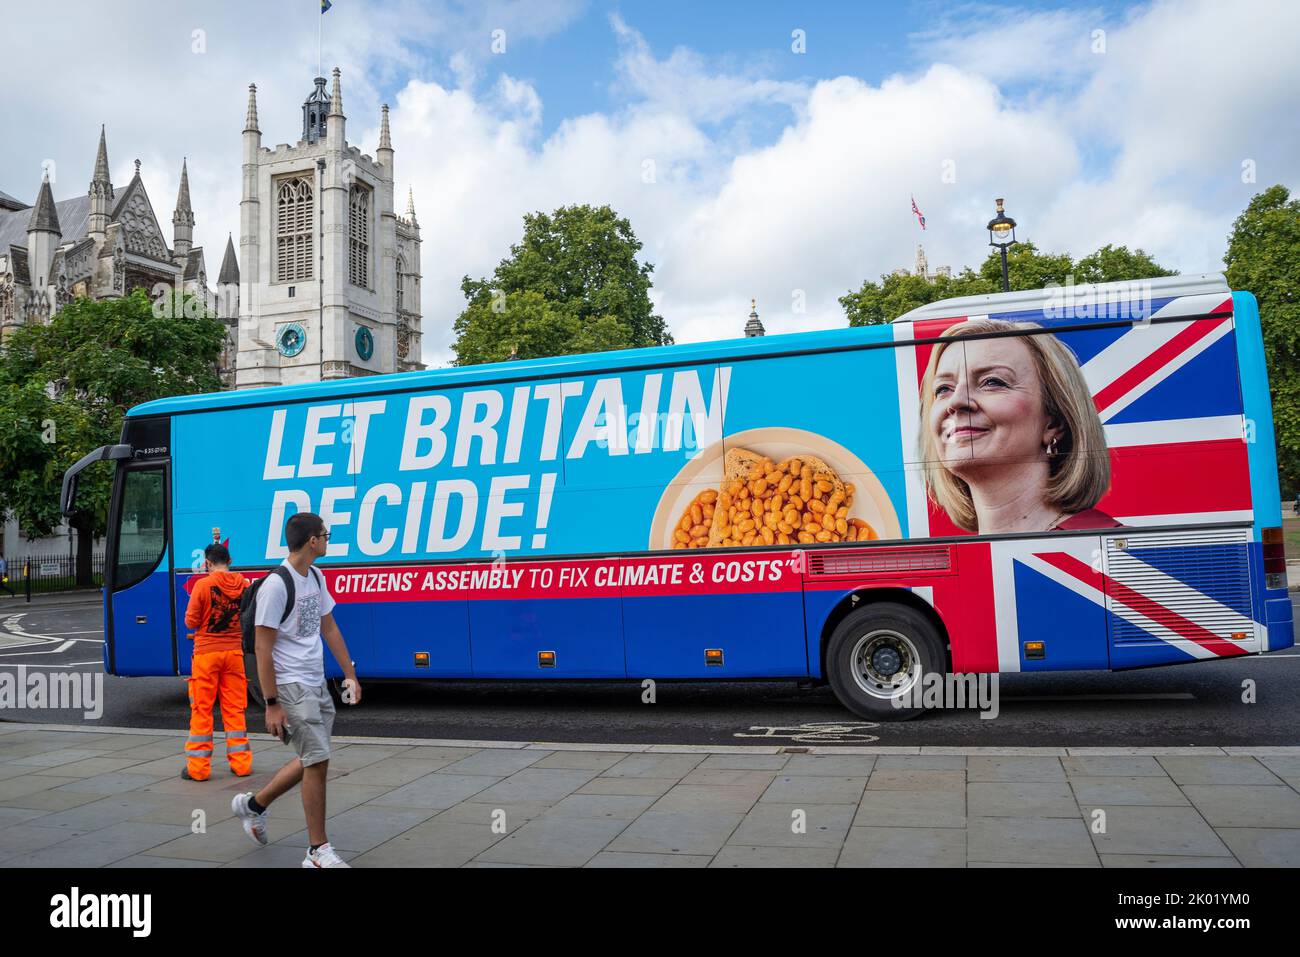 A hoax bus from Extinction Rebellion with the appearance of a Liz Truss campaign bus. Citizen's assembly and Let Britain Decide slogans. At Parliament Stock Photo